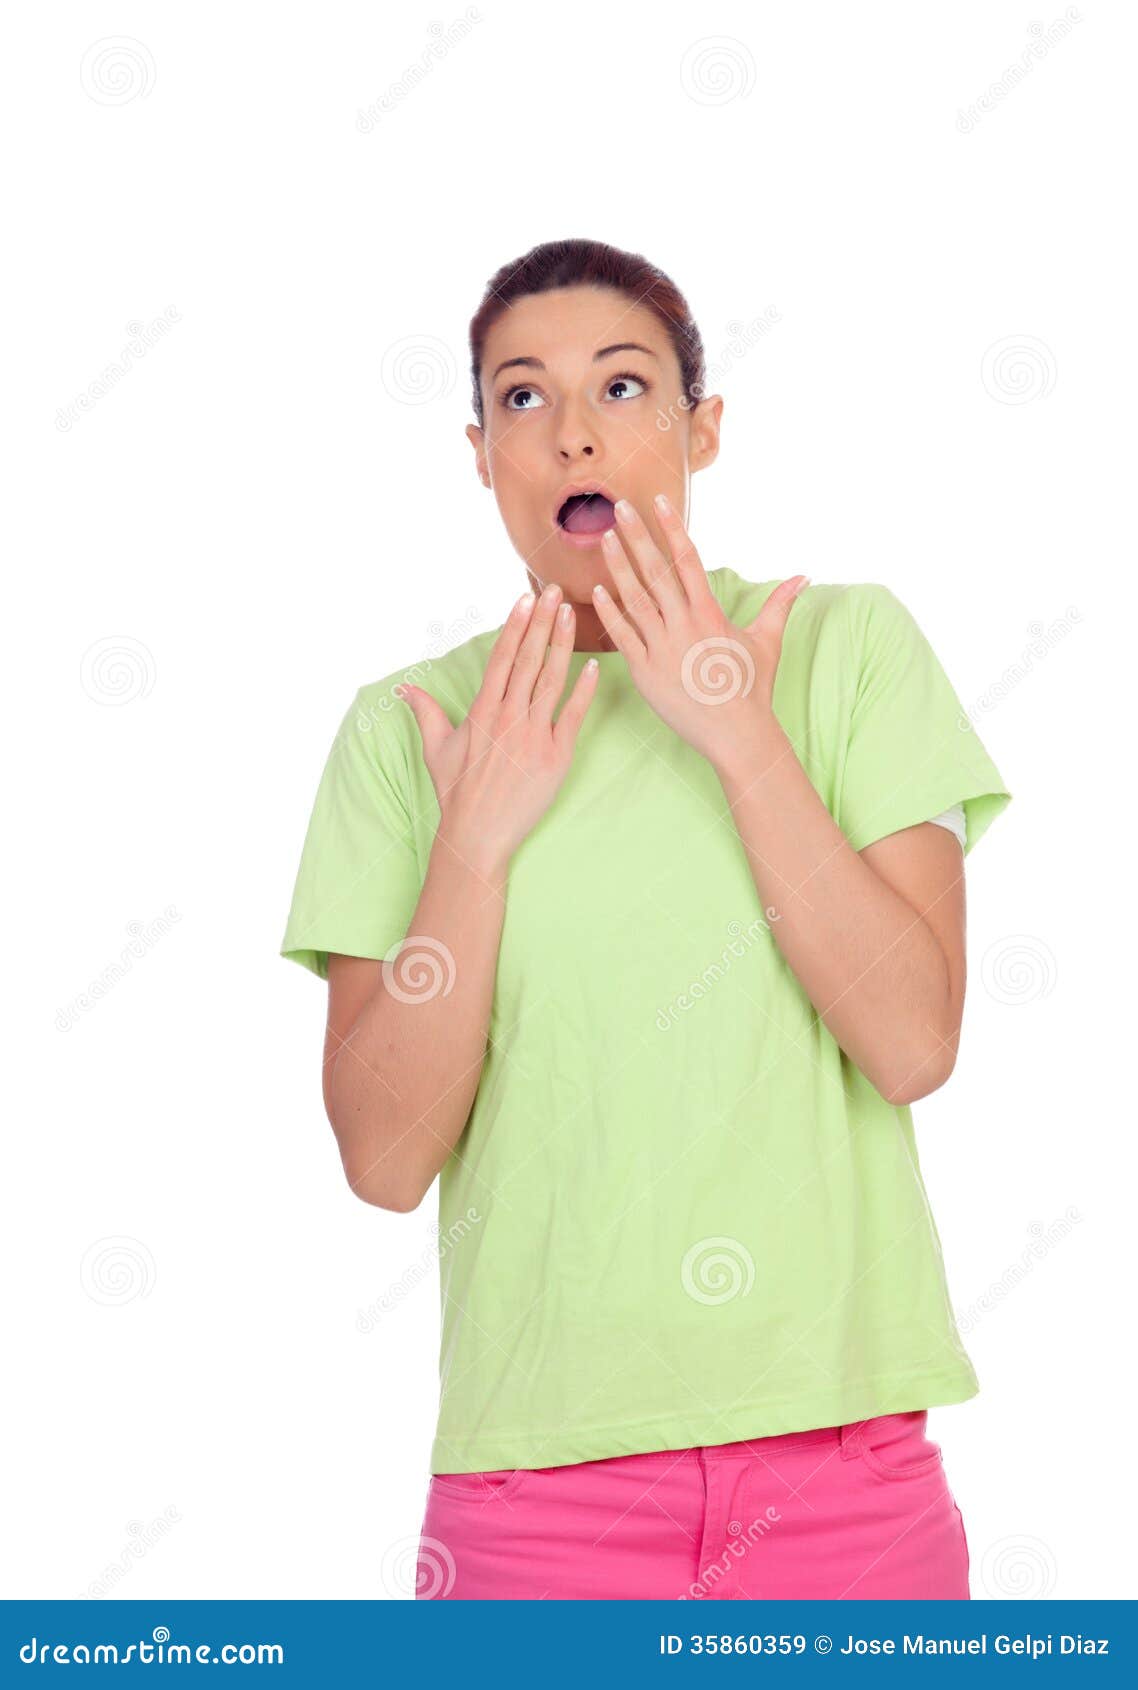 Surprised Girl with Pink Jeans Stock Image - Image of holding, female ...